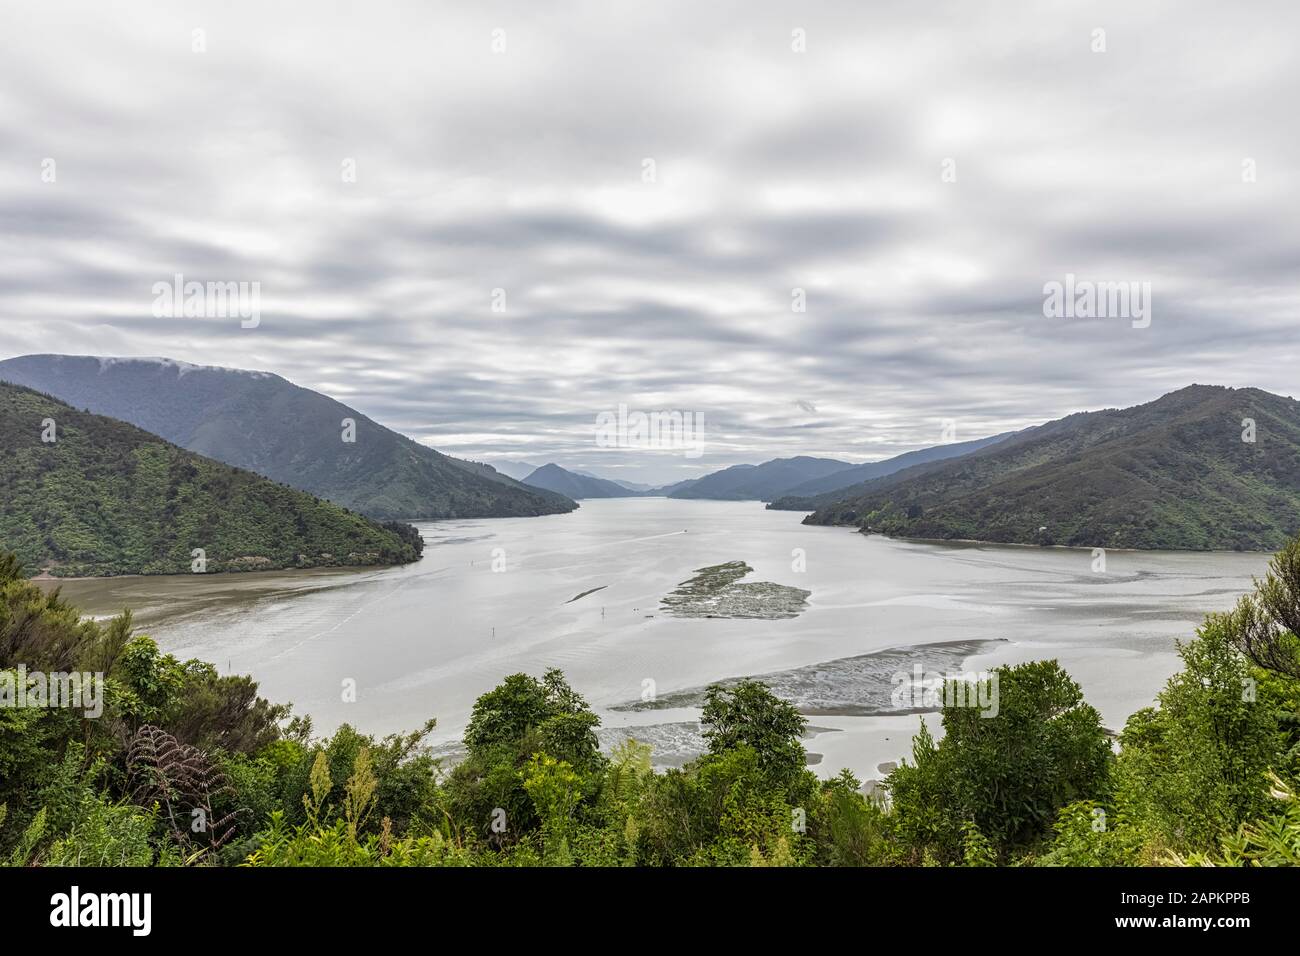 New Zealand, Marlborough Region, Havelock, Clouds over Pelorus Sound seen from Cullen Point lookout Stock Photo